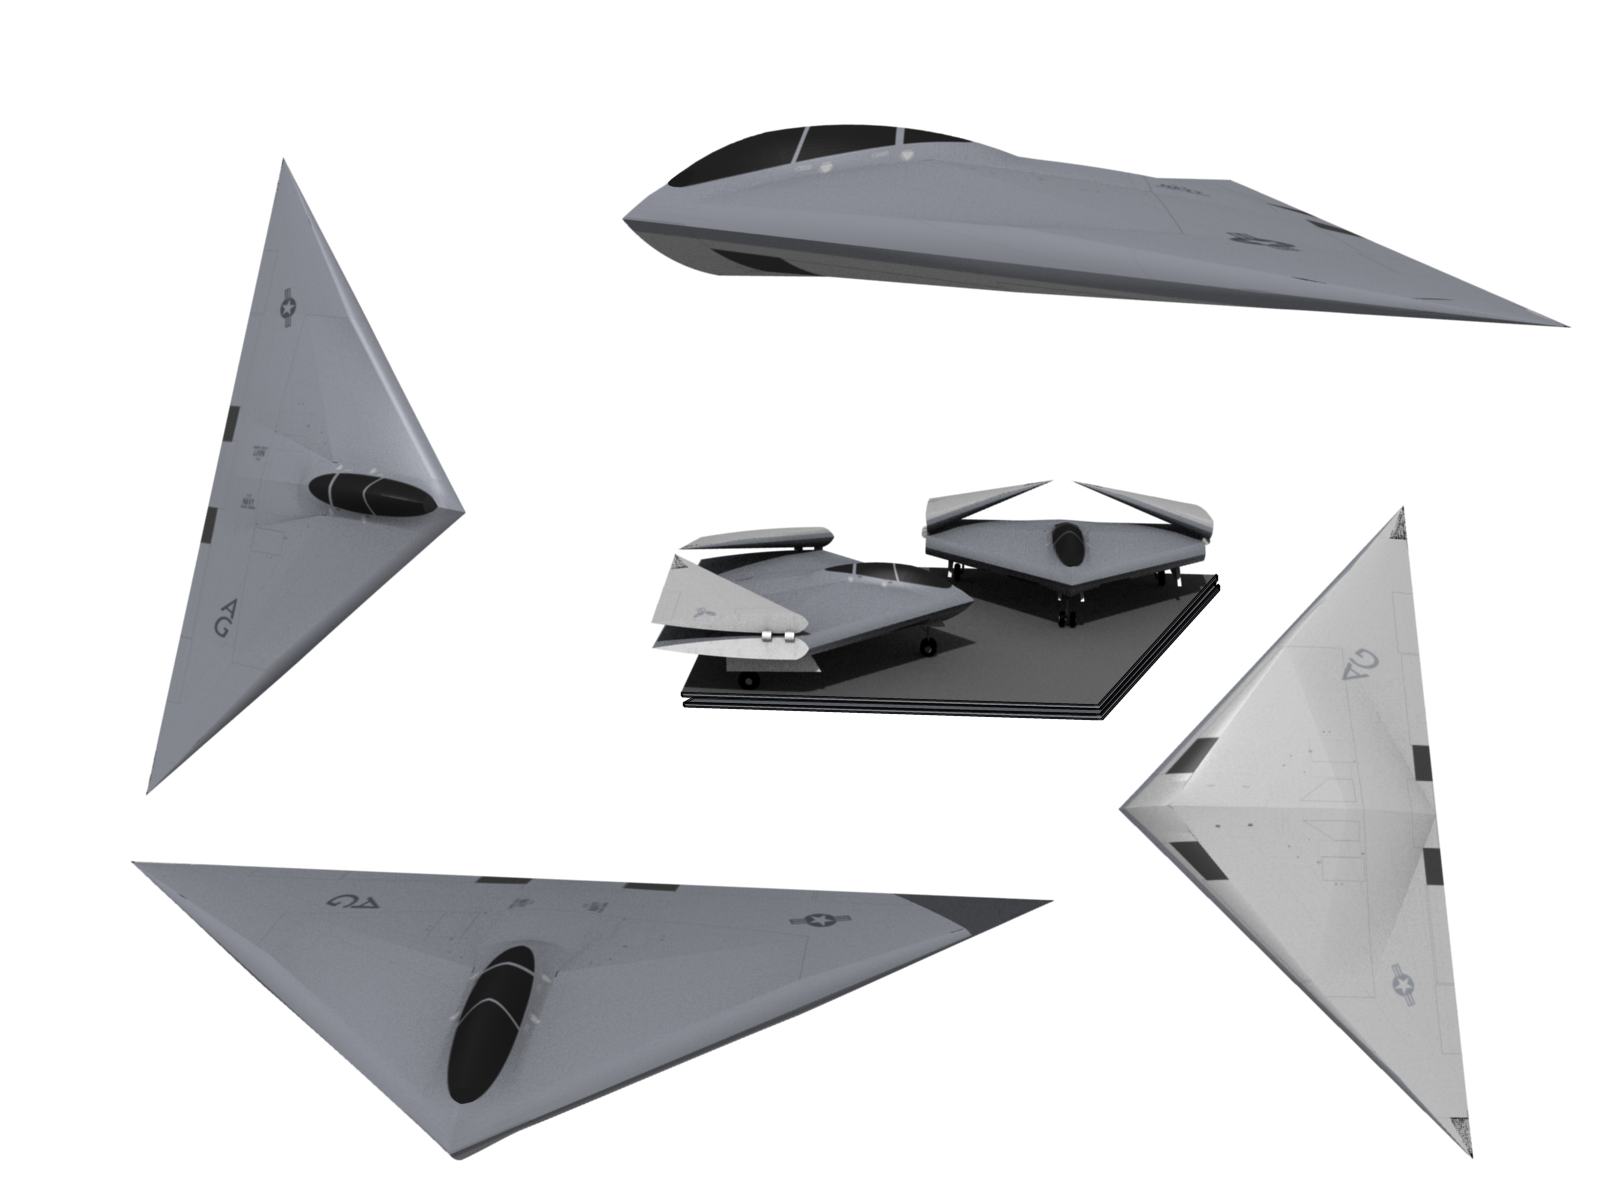 CGI rendering of the A-12 showing various elevations as well as the folding wings